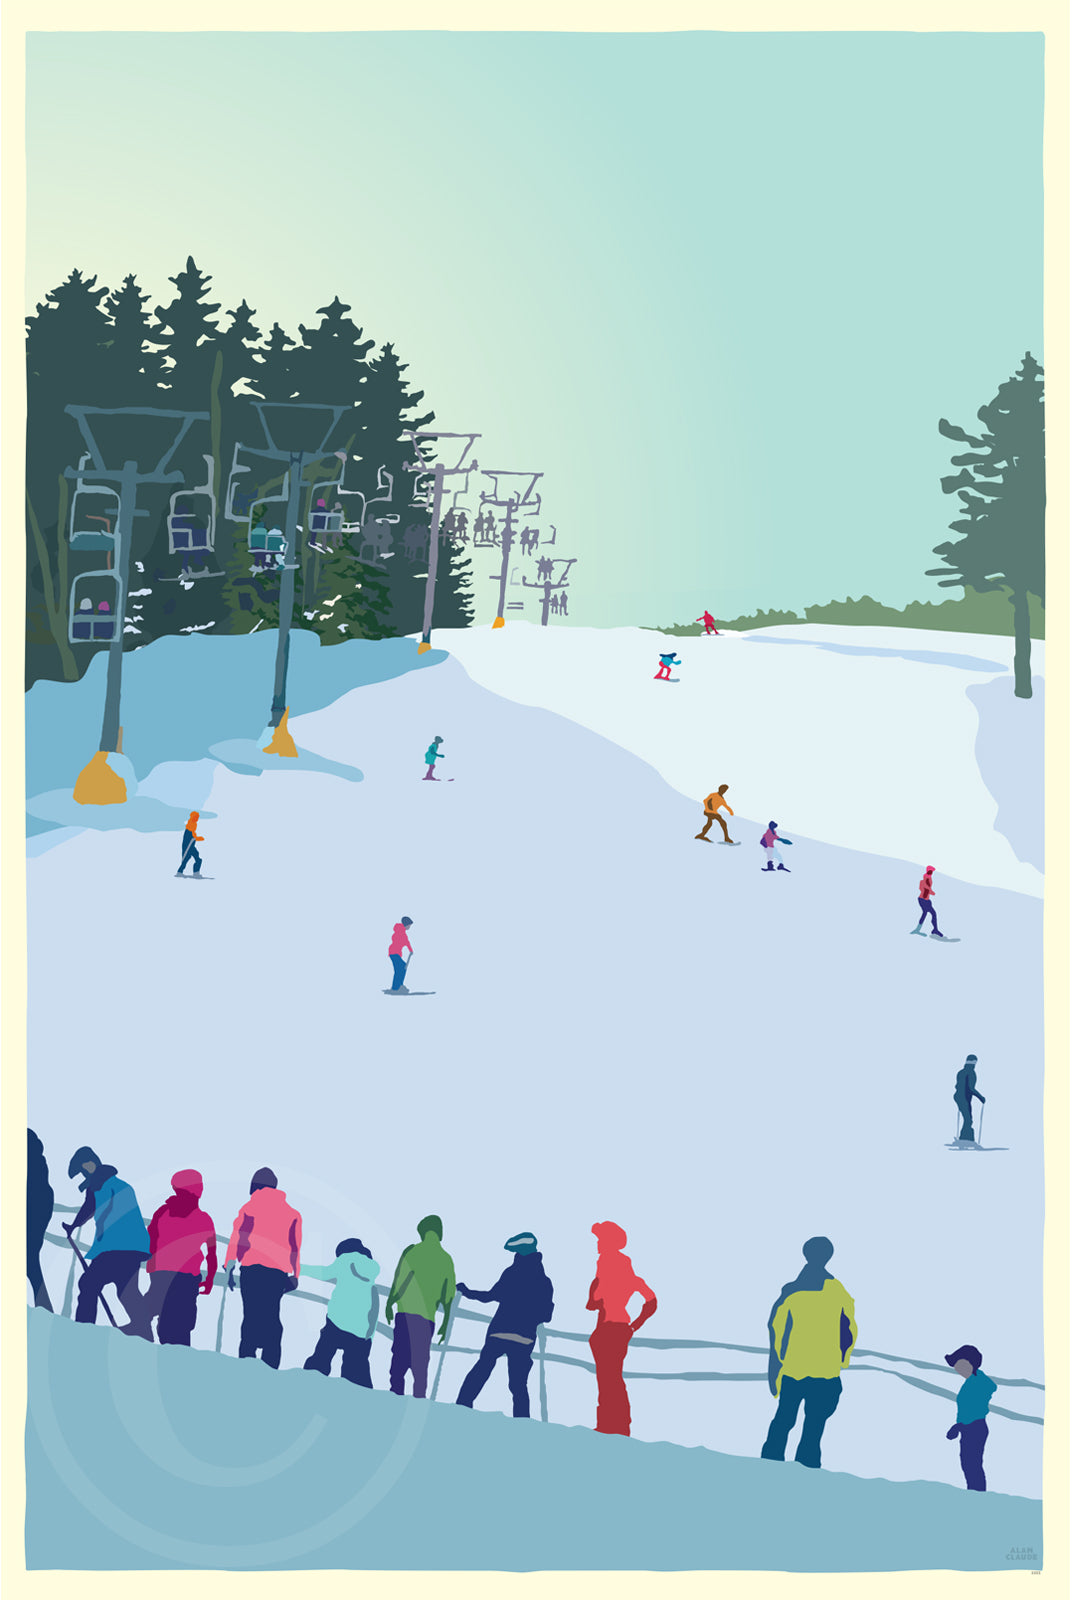 Skiing Snowbowl Art Print 24" x 36" Wall Poster By Alan Claude - Maine